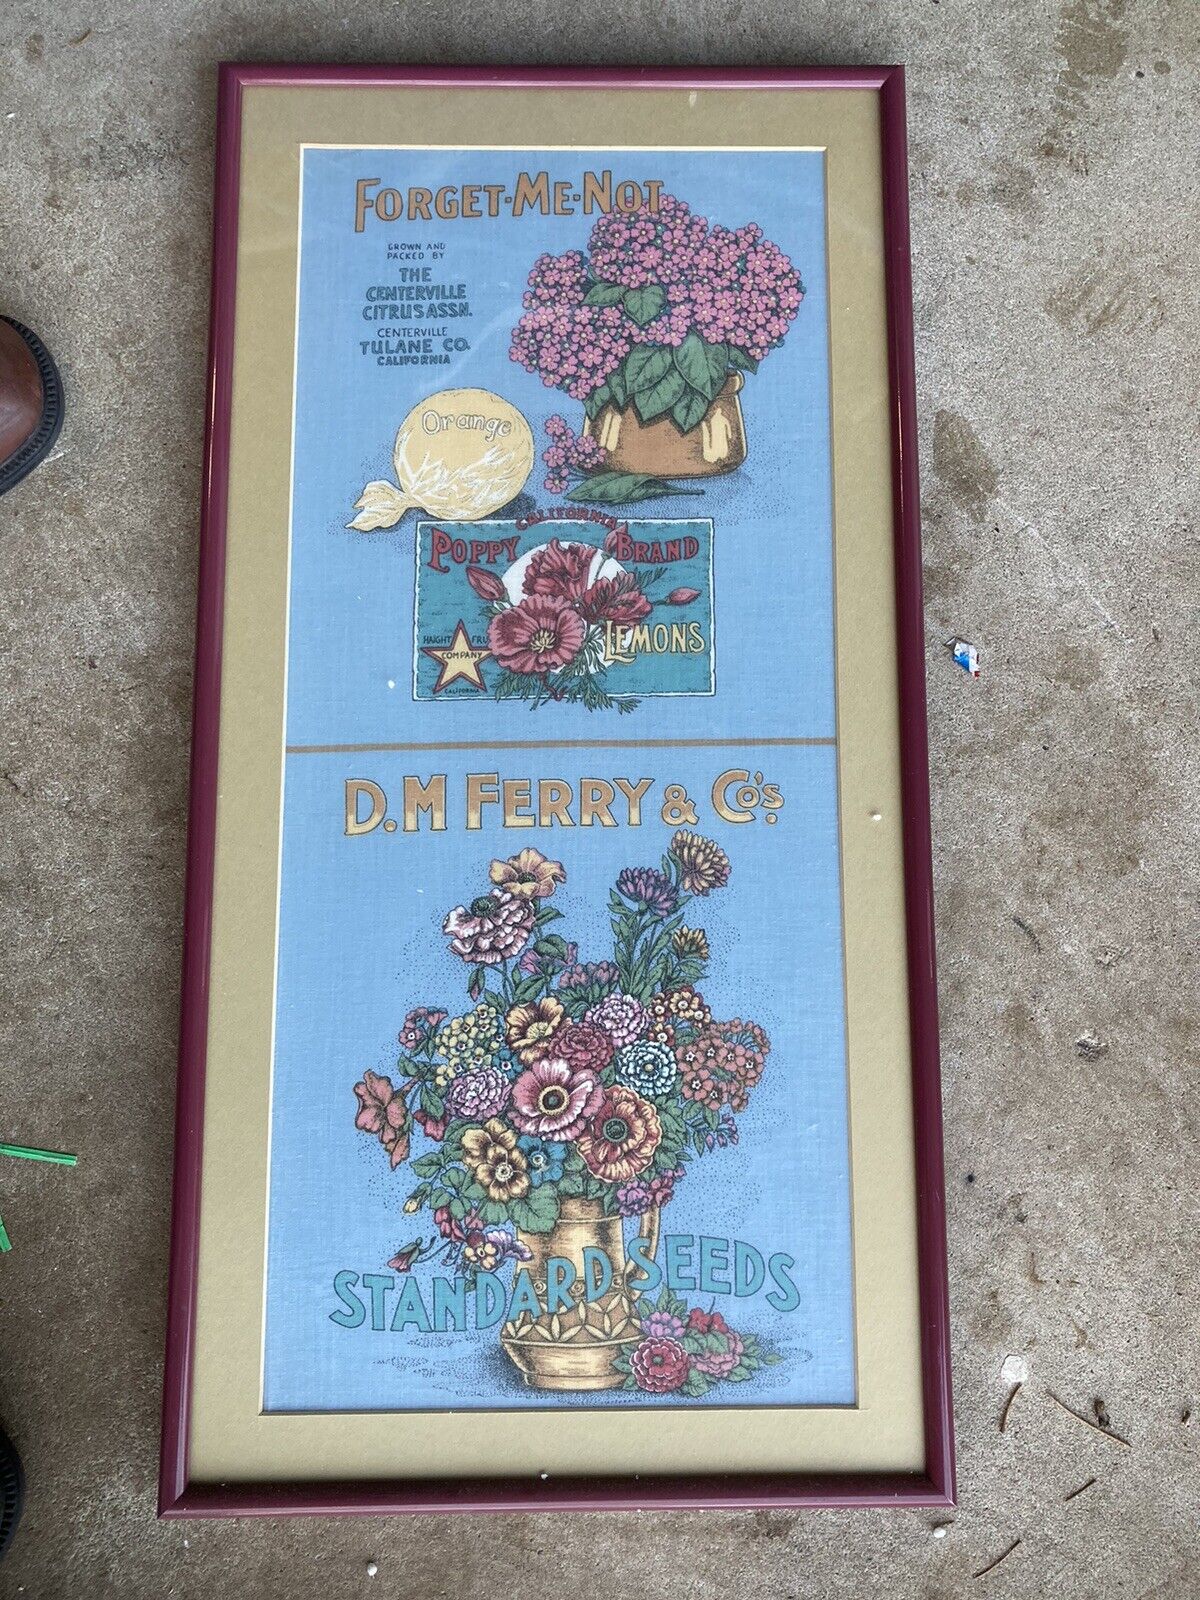 Framed matted Fabric 26x13” Ferry Seed Co advertisement